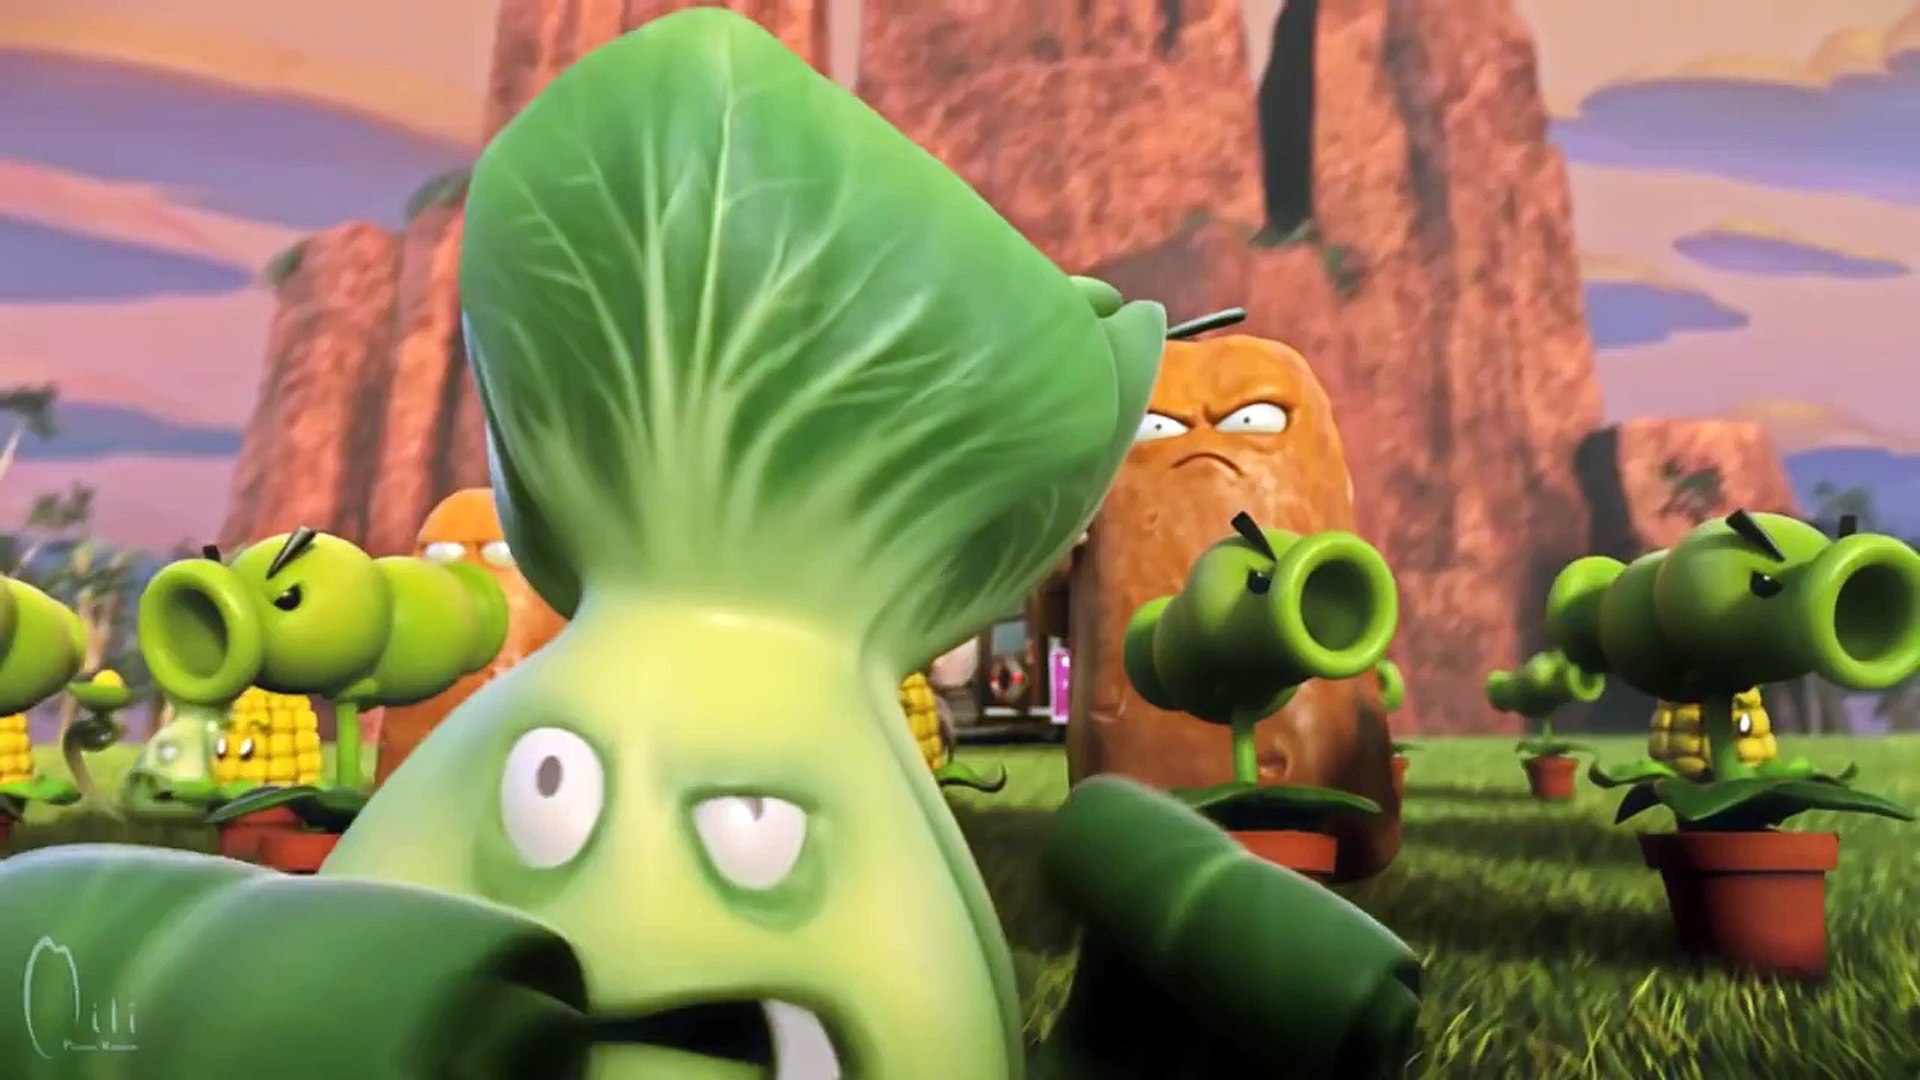 Plants Vs Zombies Online Funny Animation Trailer 